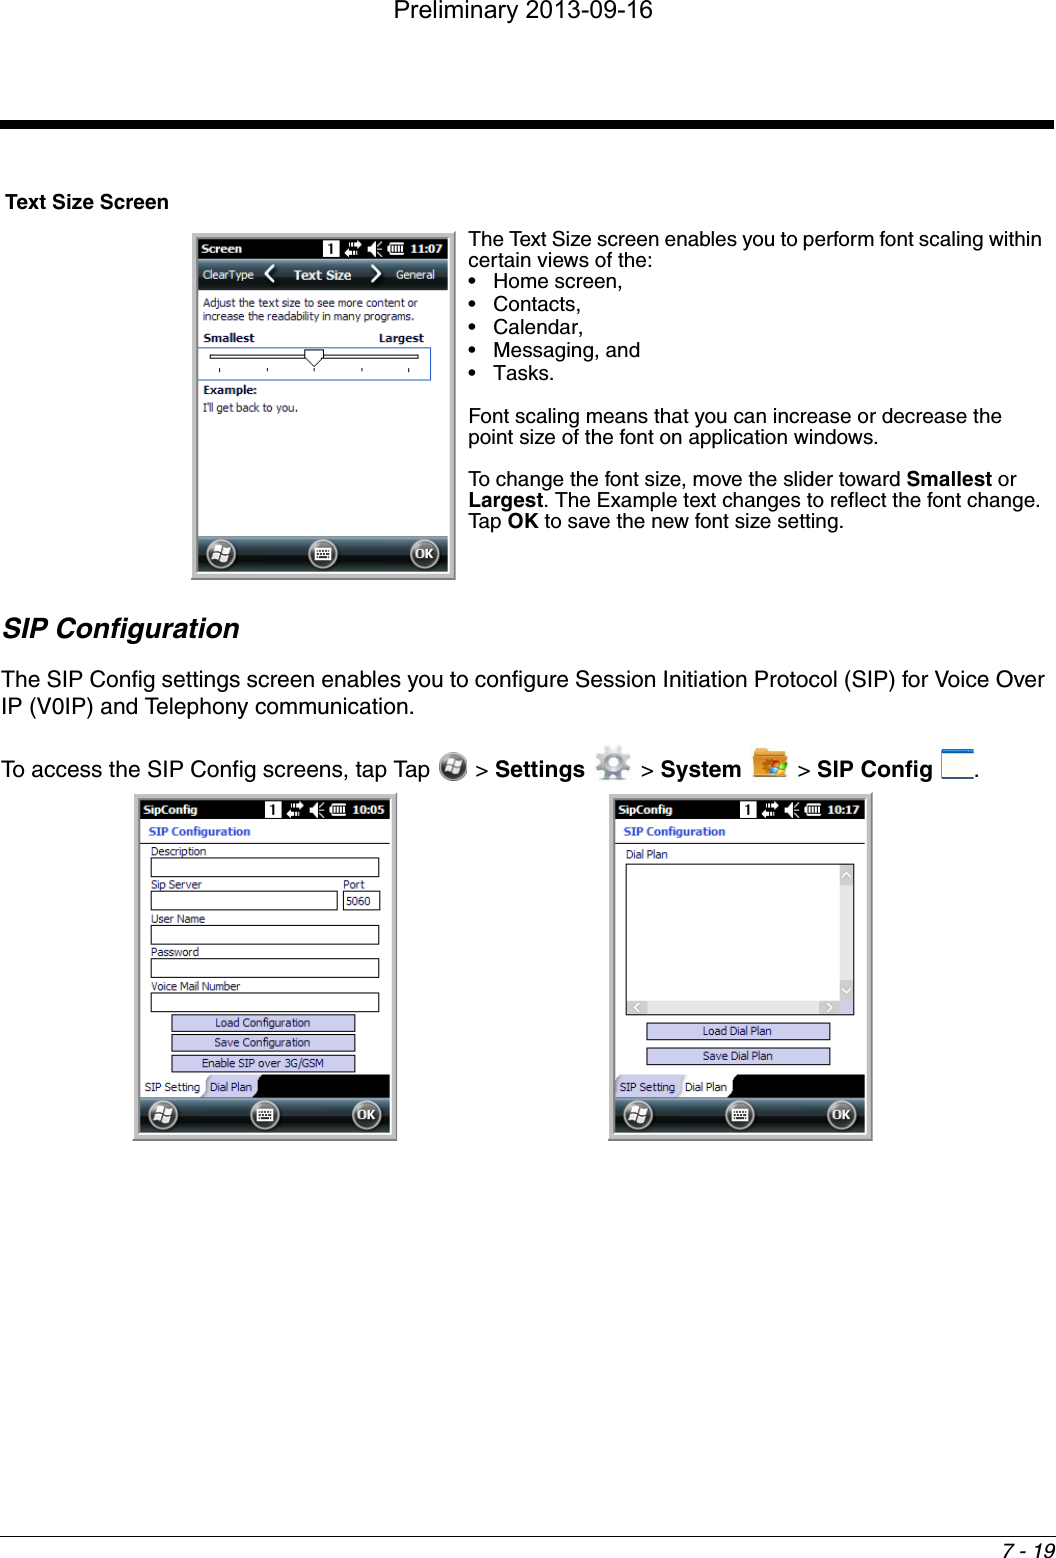 7 - 19SIP ConfigurationThe SIP Config settings screen enables you to configure Session Initiation Protocol (SIP) for Voice Over IP (V0IP) and Telephony communication.To access the SIP Config screens, tap Tap   &gt; Settings  &gt; System   &gt; SIP Config  .Text Size ScreenThe Text Size screen enables you to perform font scaling within certain views of the: • Home screen, • Contacts, • Calendar, • Messaging, and •Tasks. Font scaling means that you can increase or decrease the point size of the font on application windows.To change the font size, move the slider toward Smallest or Largest. The Example text changes to reflect the font change. Tap OK to save the new font size setting. Preliminary 2013-09-16